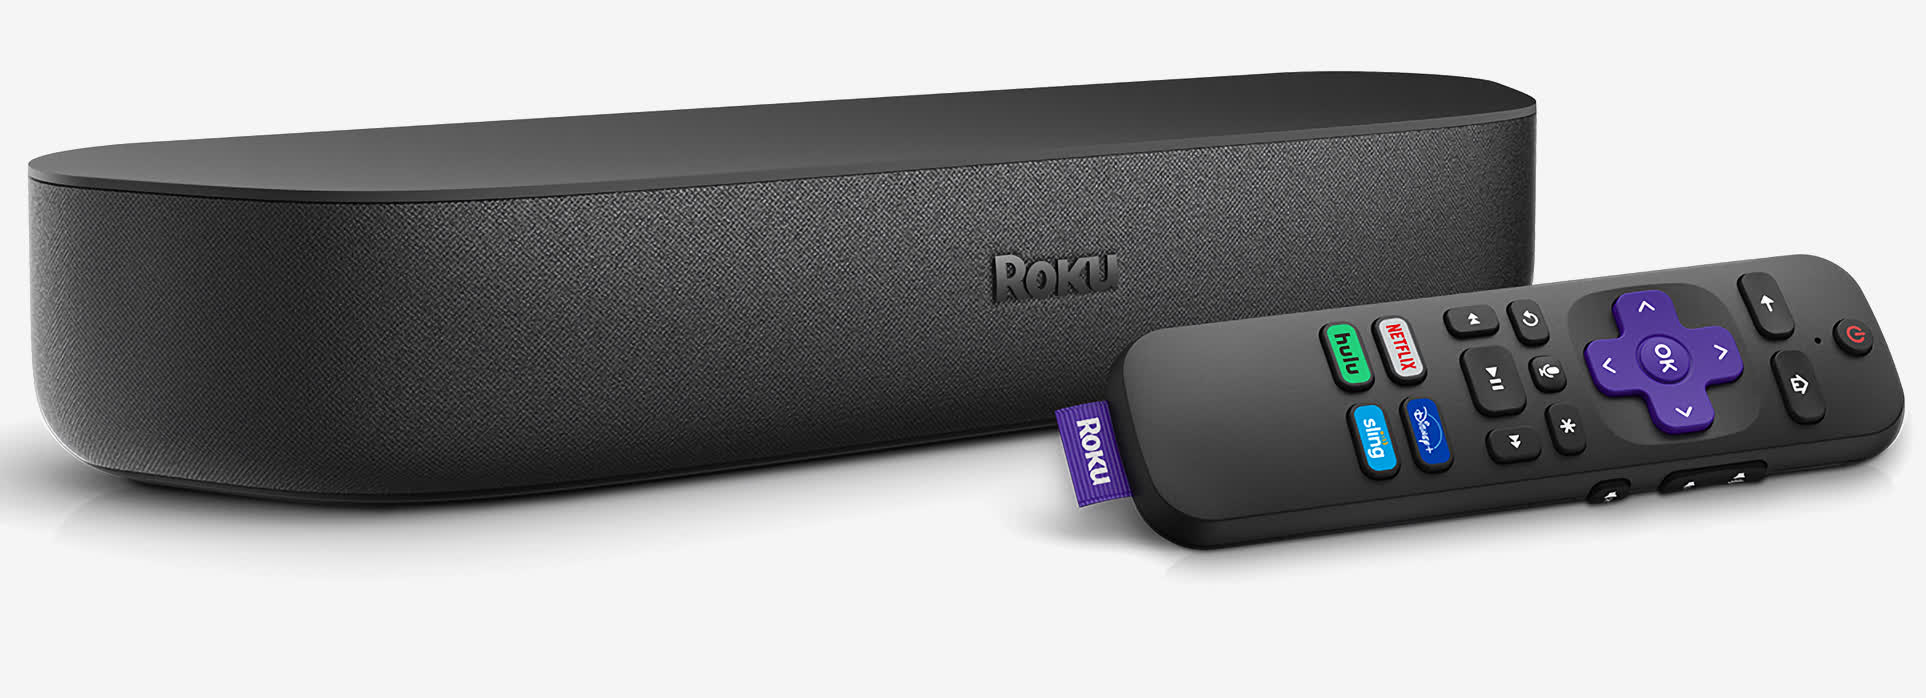 Get Dolby Audio and 4K streams with Roku's new $129 Streambar